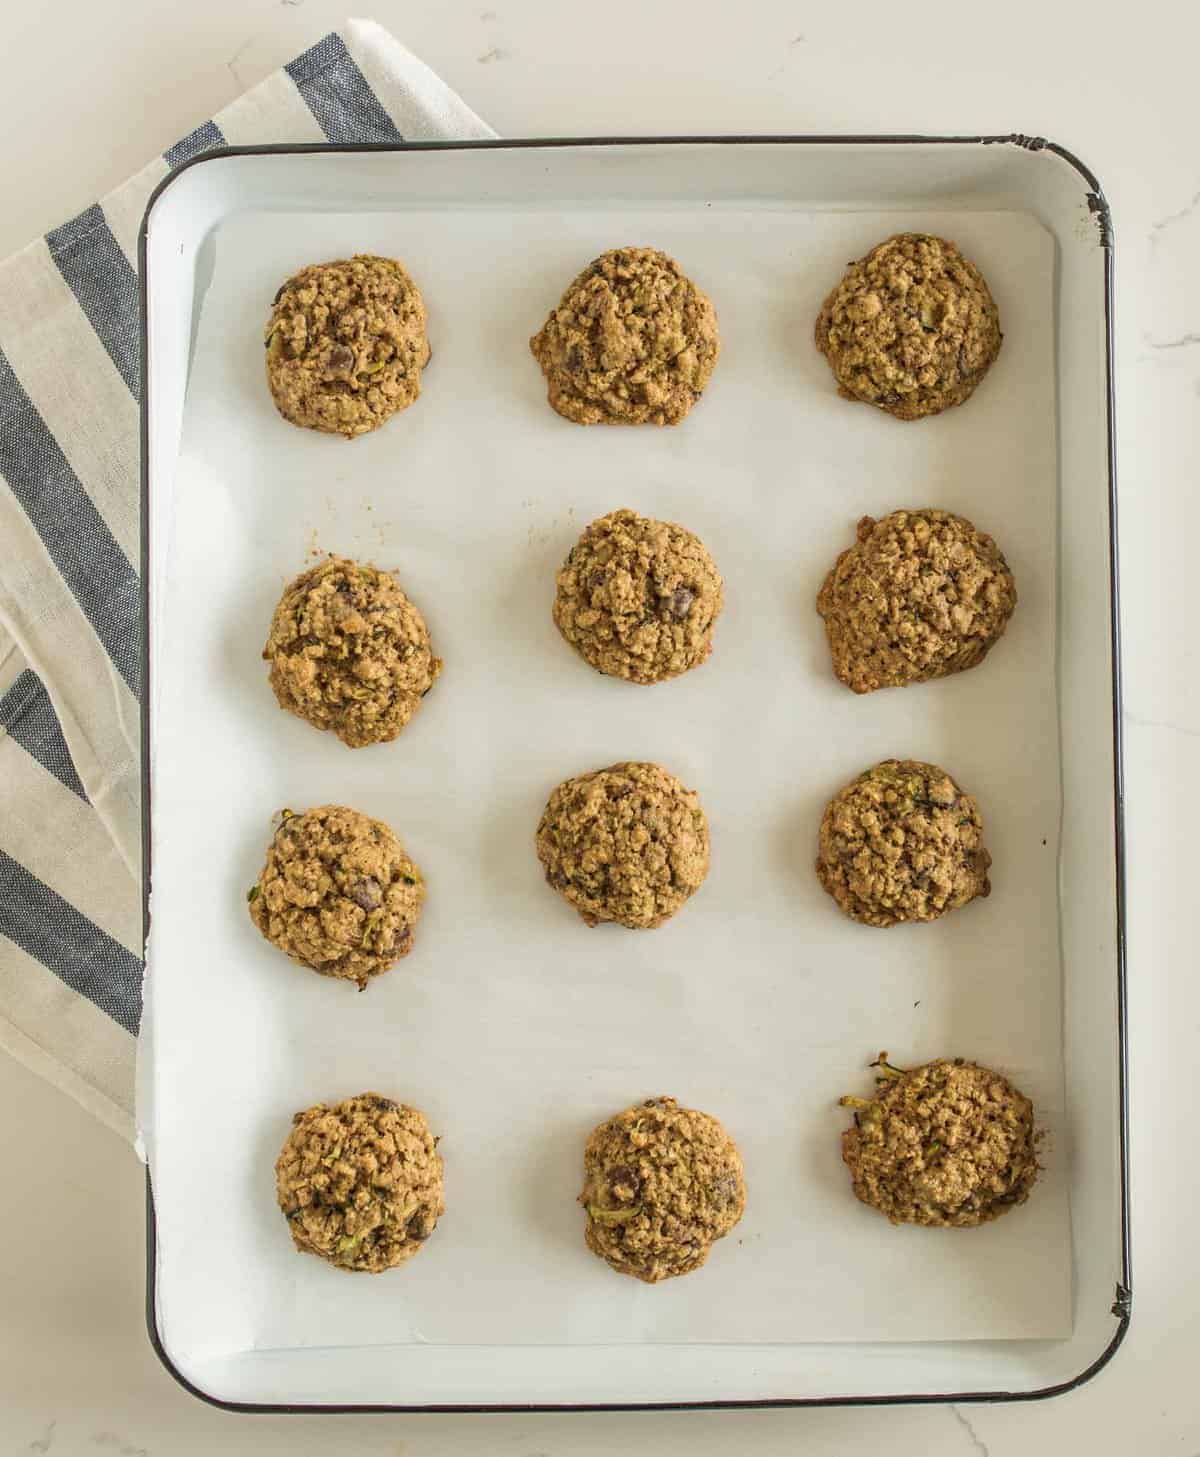 Chocolate Chip Oatmeal Zucchini cookies made with whole wheat flour, oats, chocolate chips, pecans, and shredded zucchini.